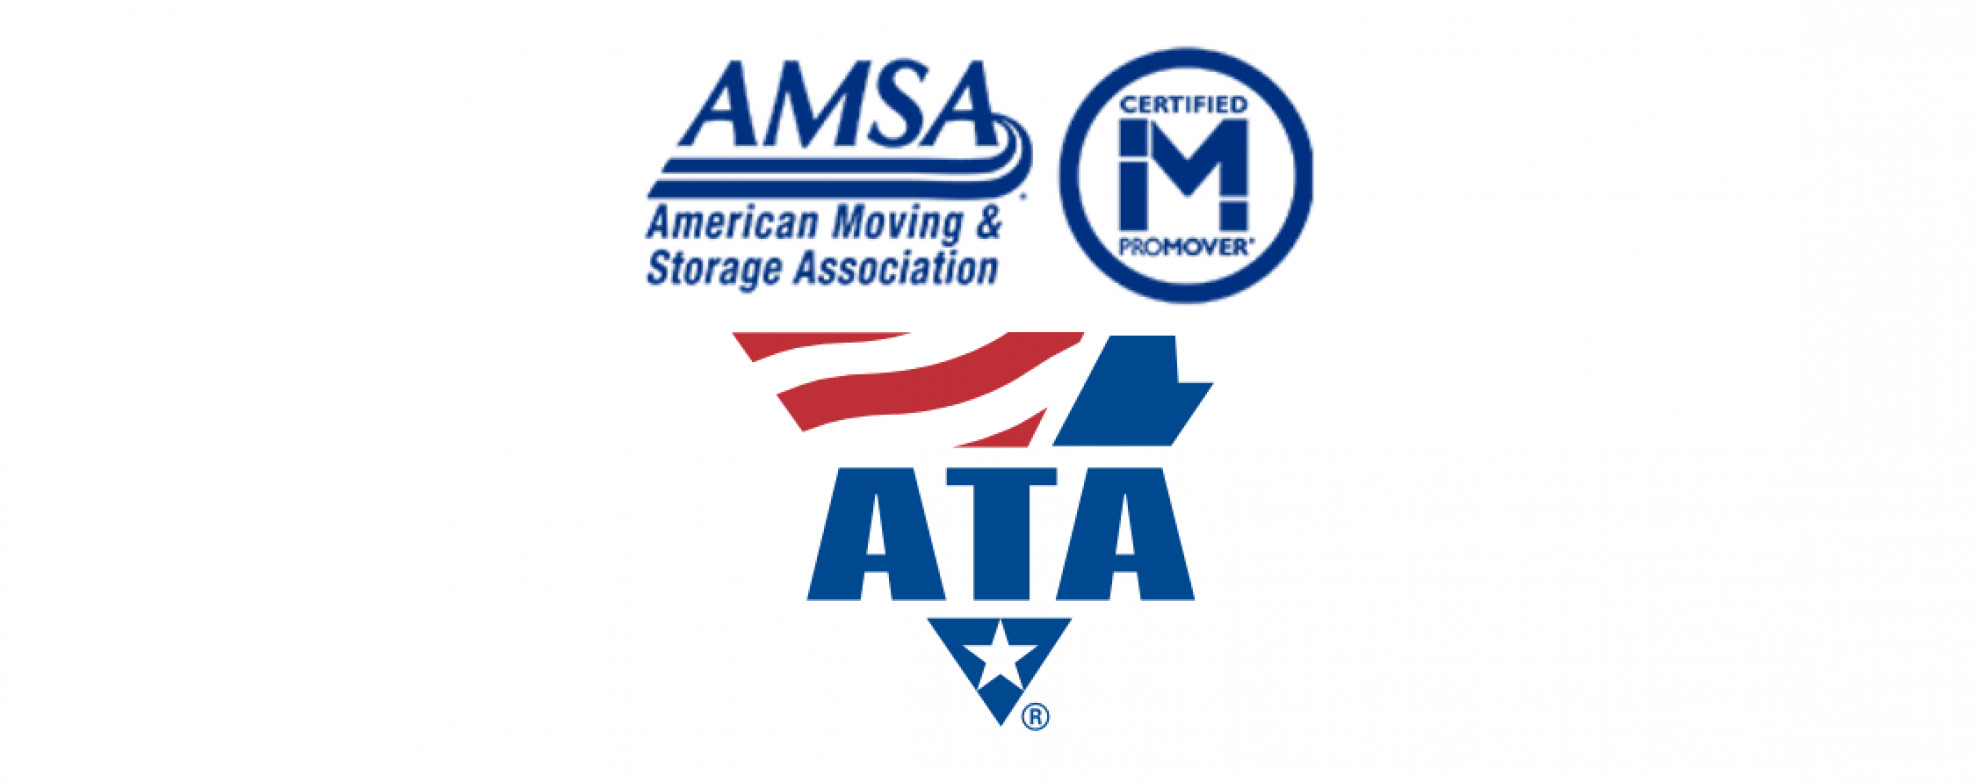 American Moving and Storage Association (AMSA) joins the American Trucking Associations (ATA)